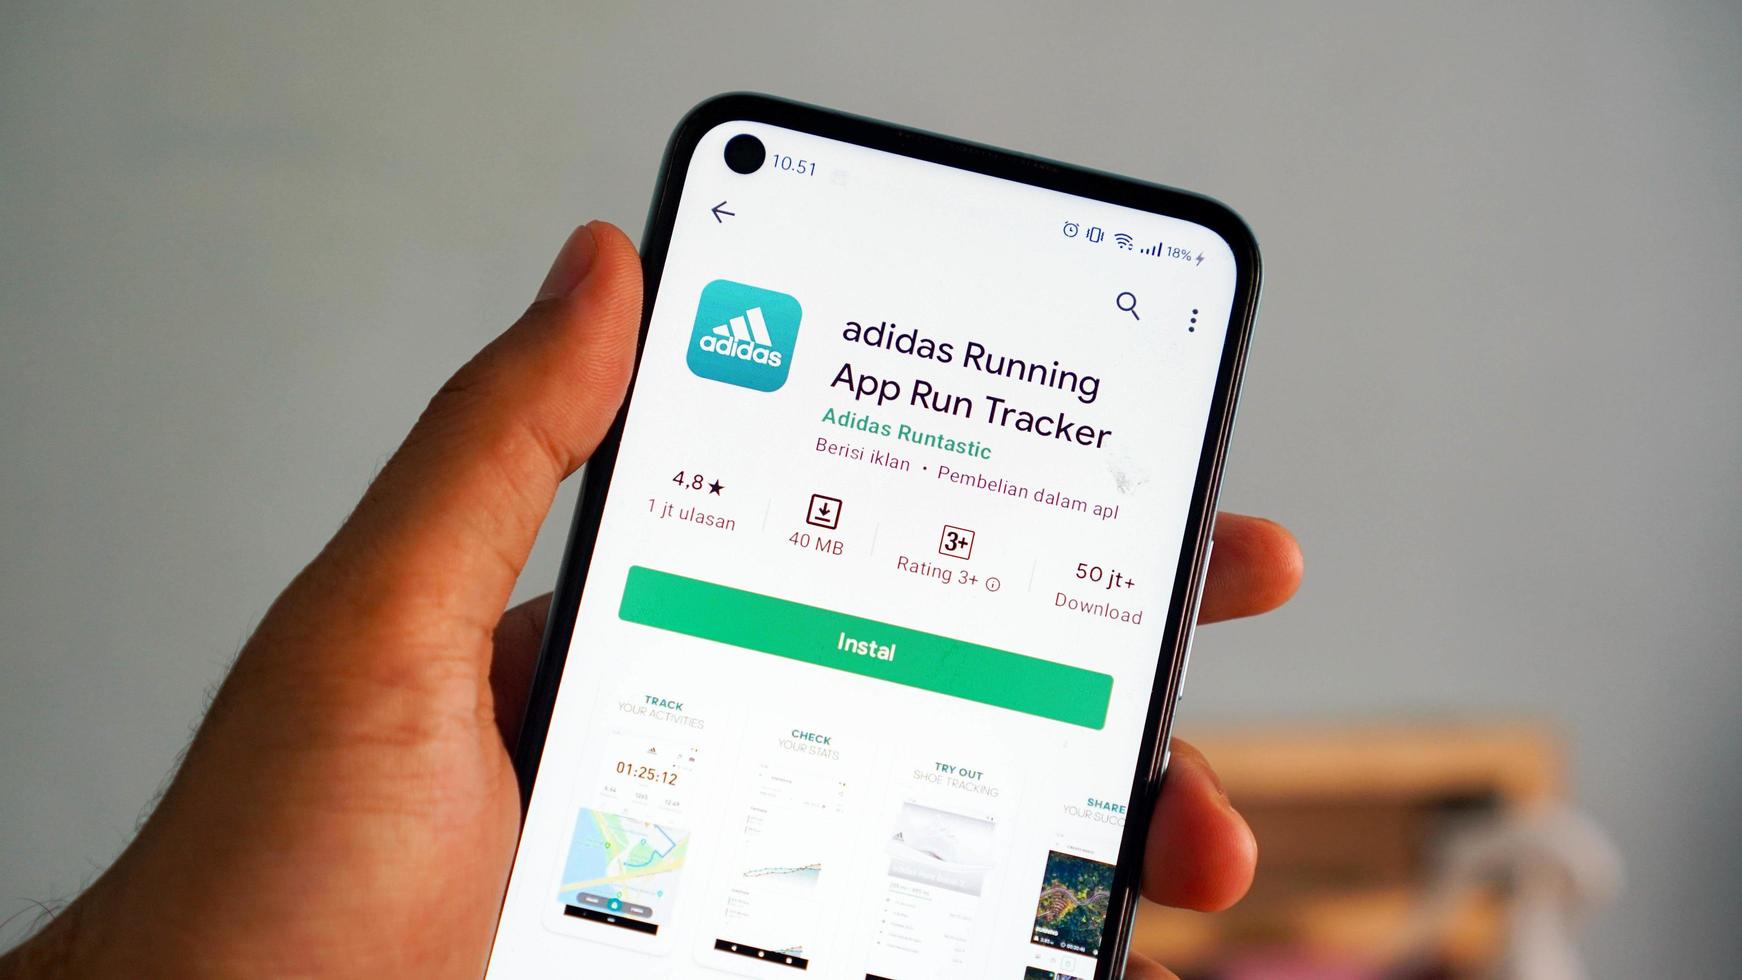 Indonesia - Adidas running. app run tracker android app. The app icon in the mobile screen close up is held by hand. 4888368 Stock Photo at Vecteezy